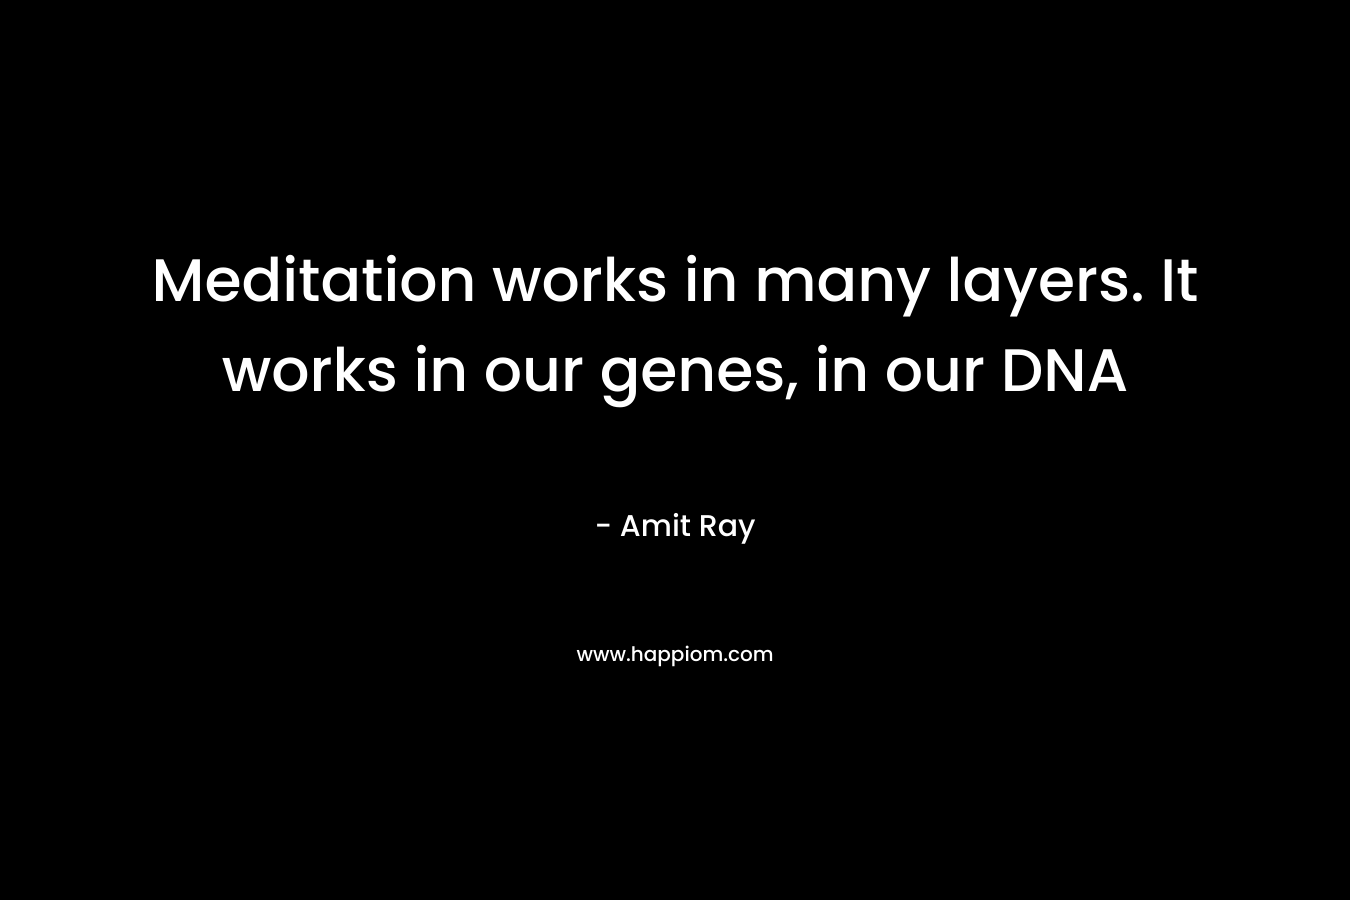 Meditation works in many layers. It works in our genes, in our DNA